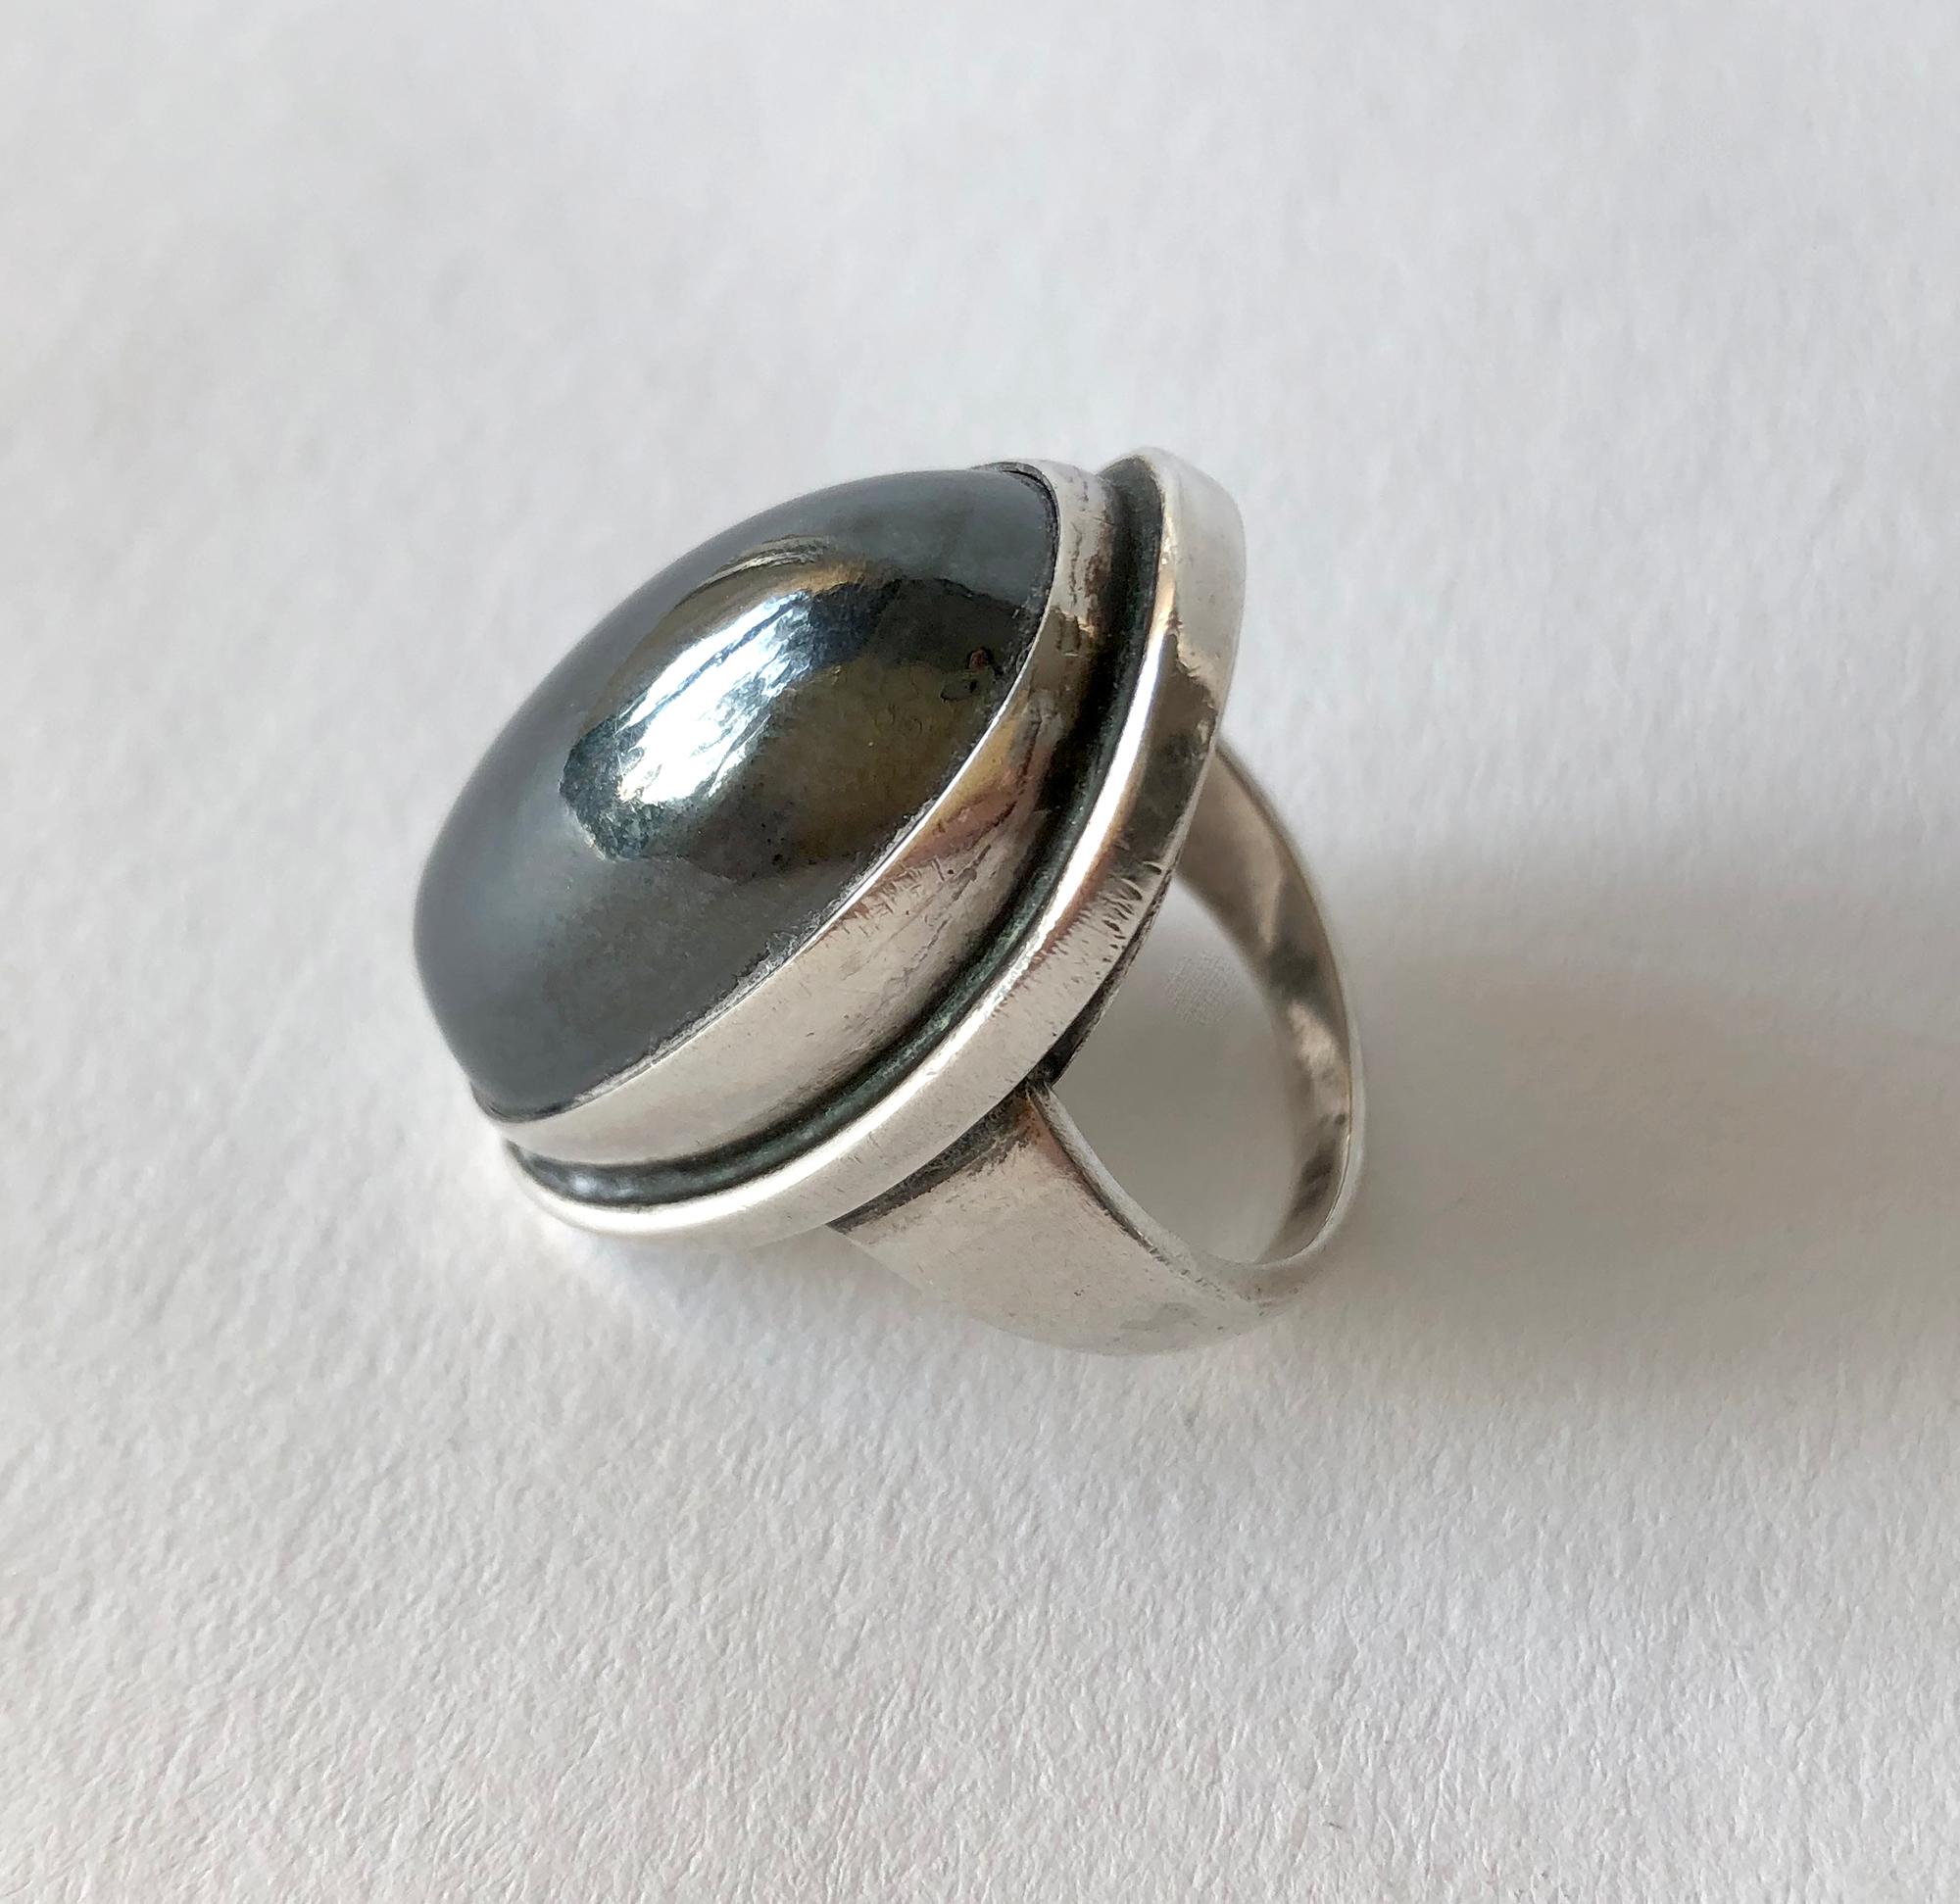 Hematite cabochon stone set in sterling silver ring designed by Harald Christian Nielsen for Georg Jensen, circa 1950.  Ring is a finger size 8.25 and is signed Georg Jensen, 46E, Denmark. In very good vintage condition.

Neilsen was a Danish